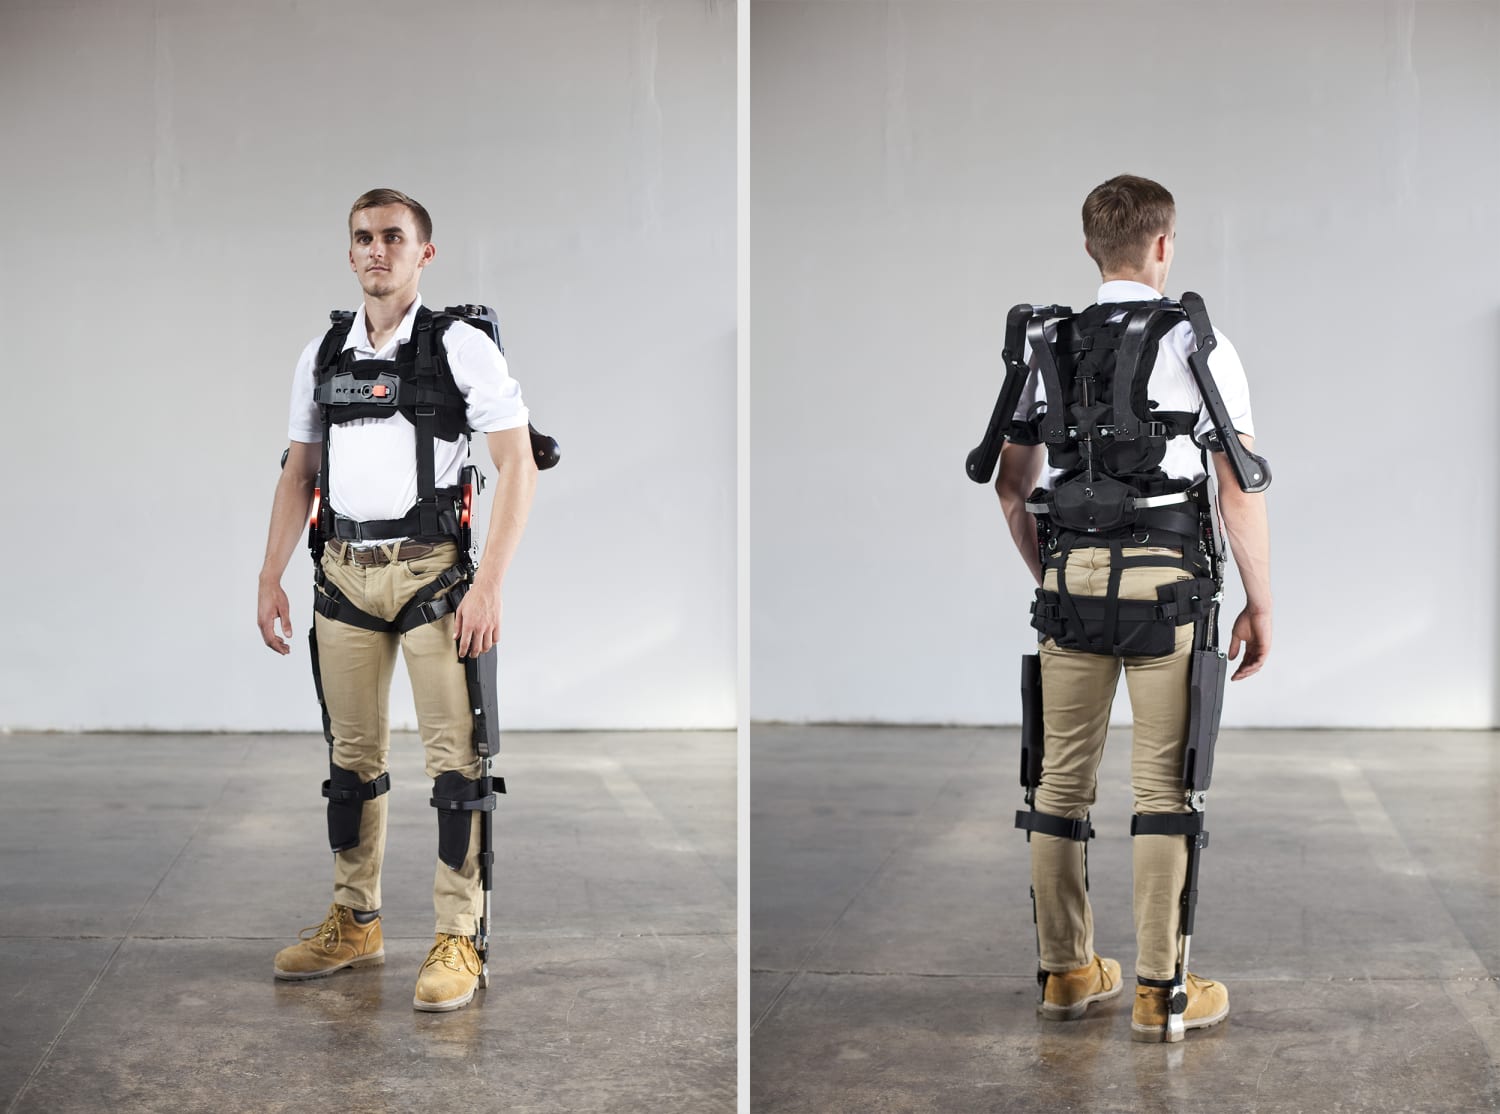 Robotic Exoskeletons Are Changing Lives in Surprising Ways